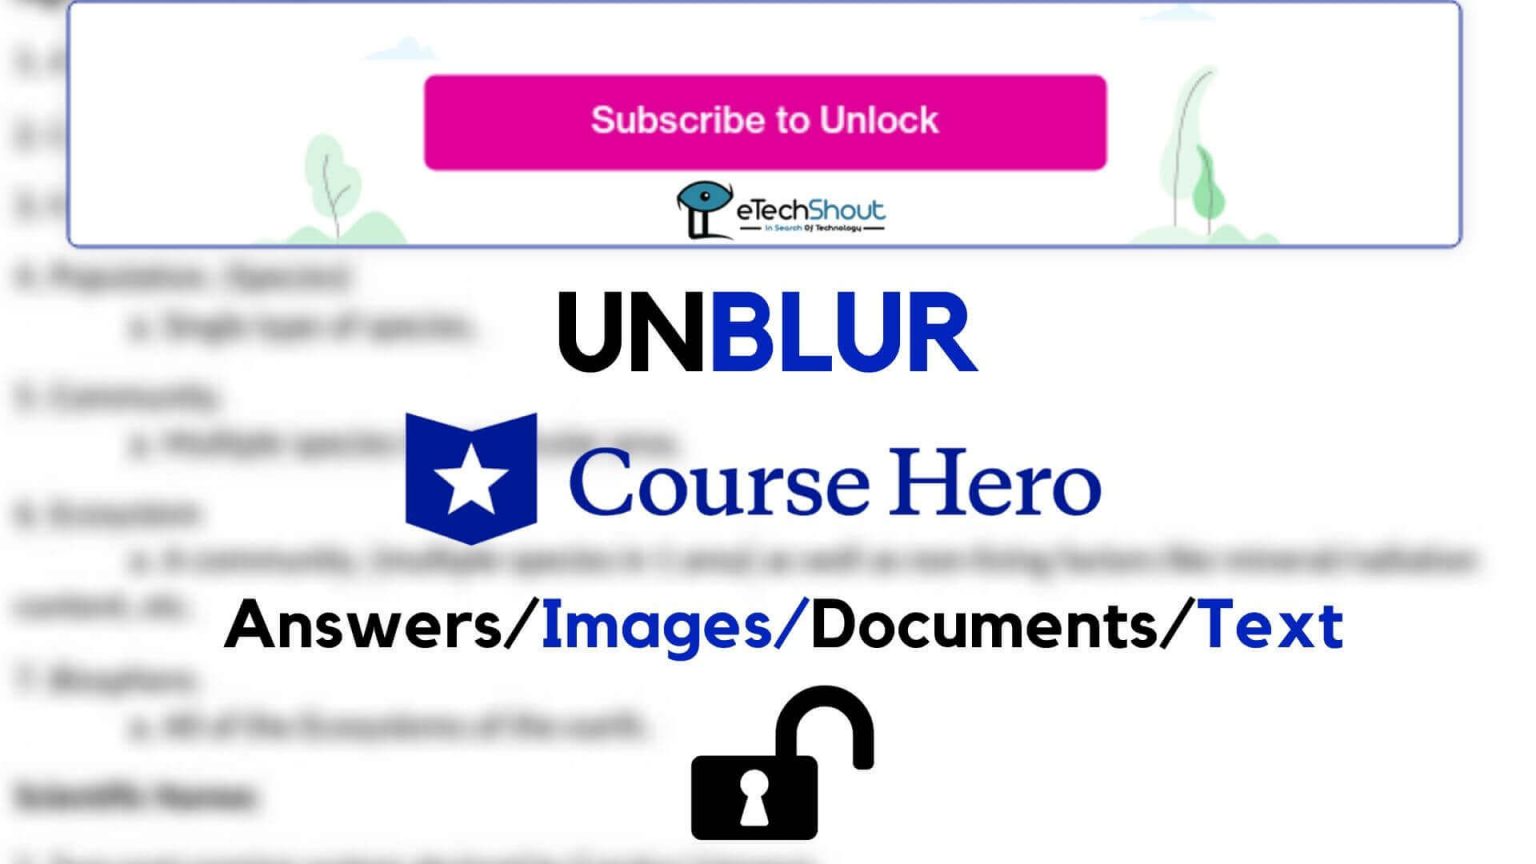 How To Unblur Course Hero Documents For FREE? (5 Methods in 2020)